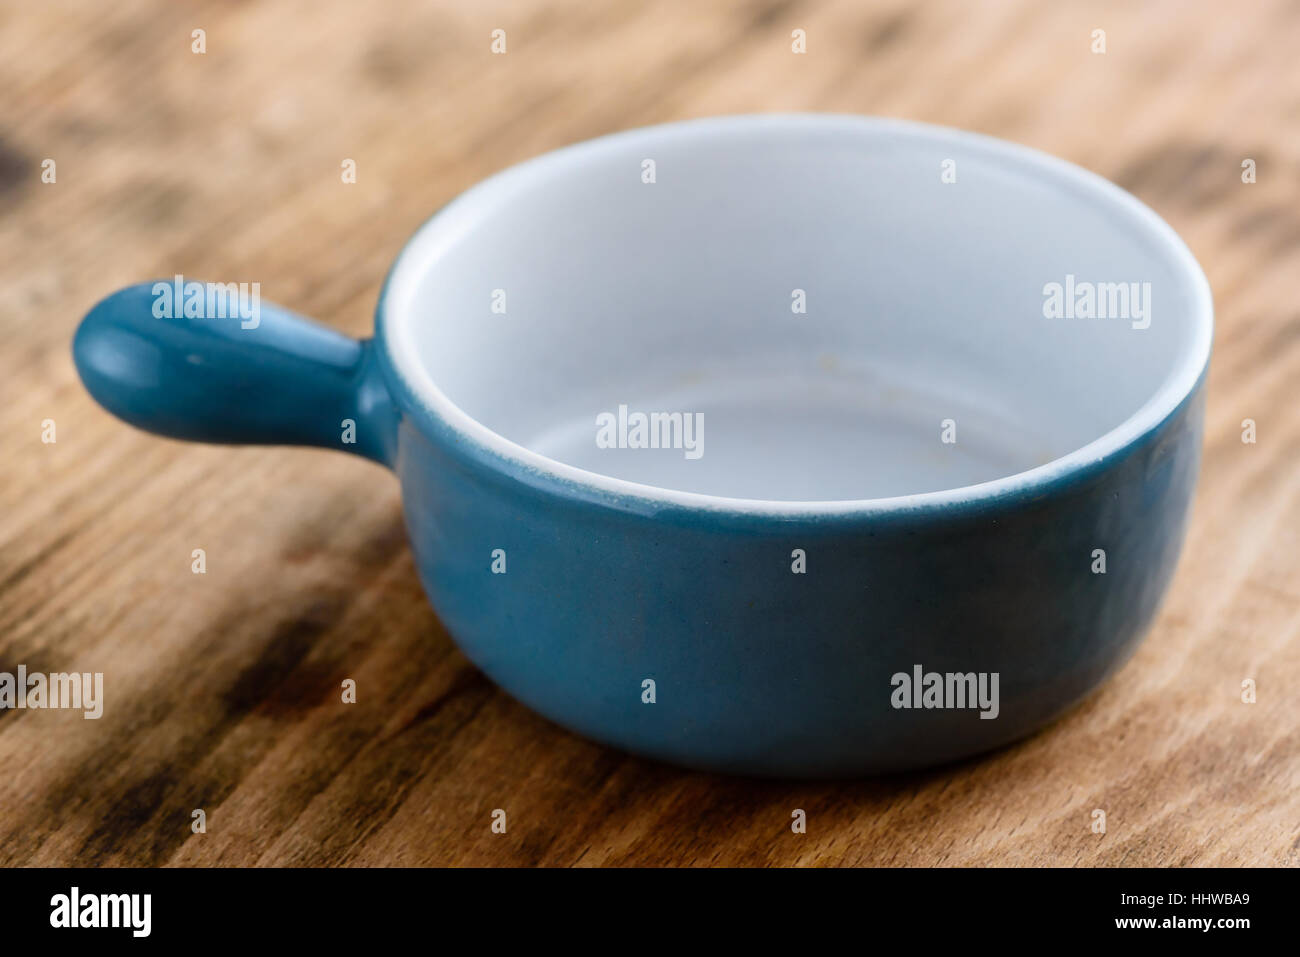 Small and blue enameled cast iron pot on wood. Stock Photo